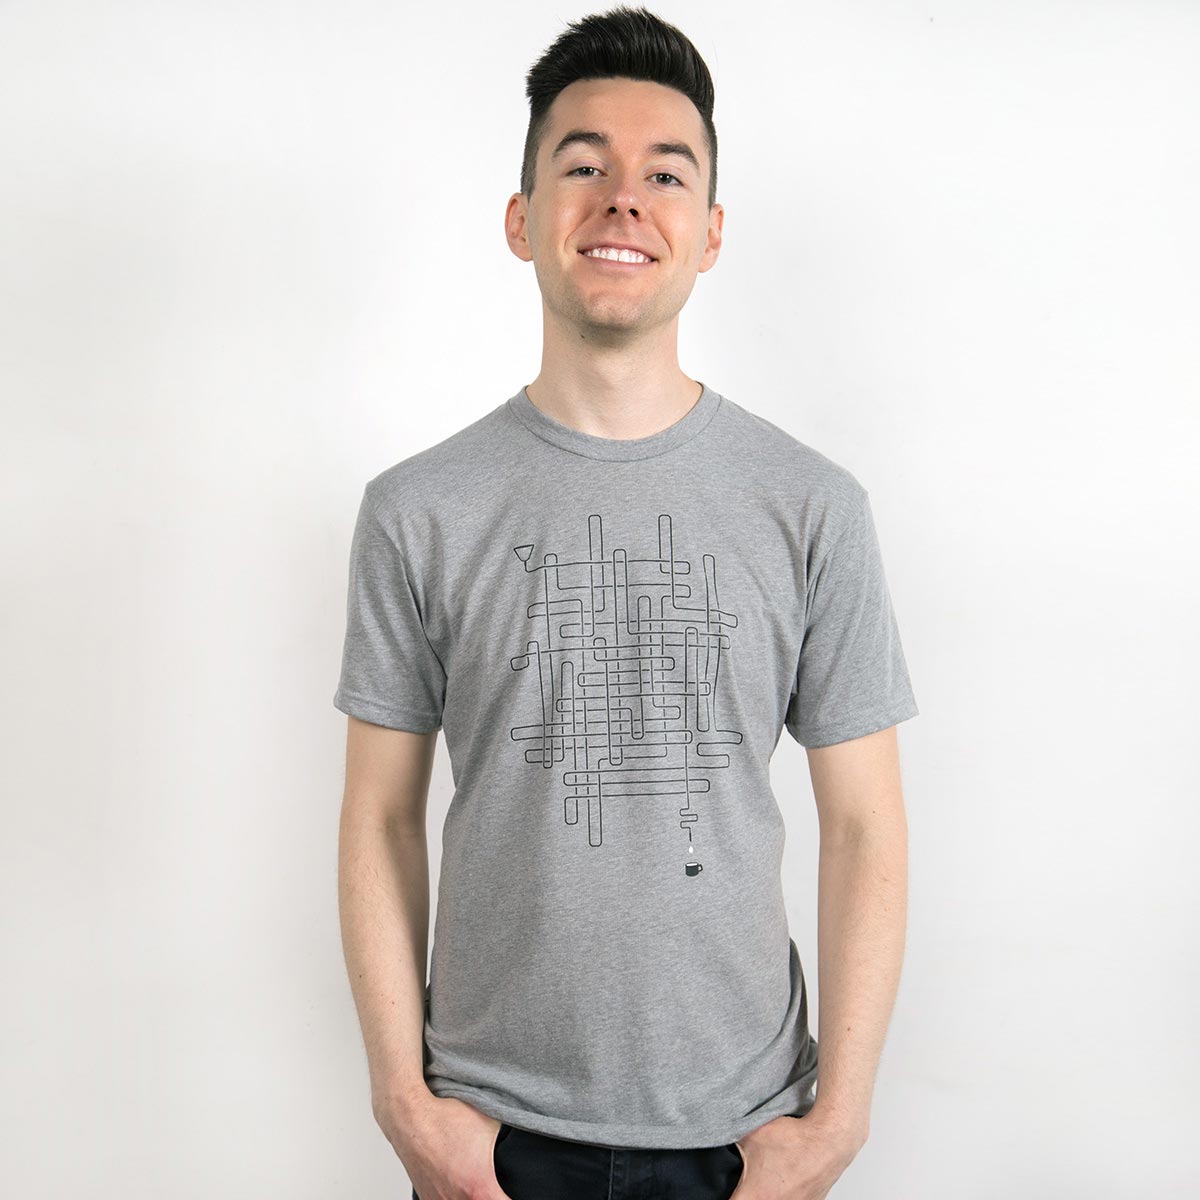 Unique gift for coffee lovers - Lifeline Coffee  T-shirt-STORY SPARK